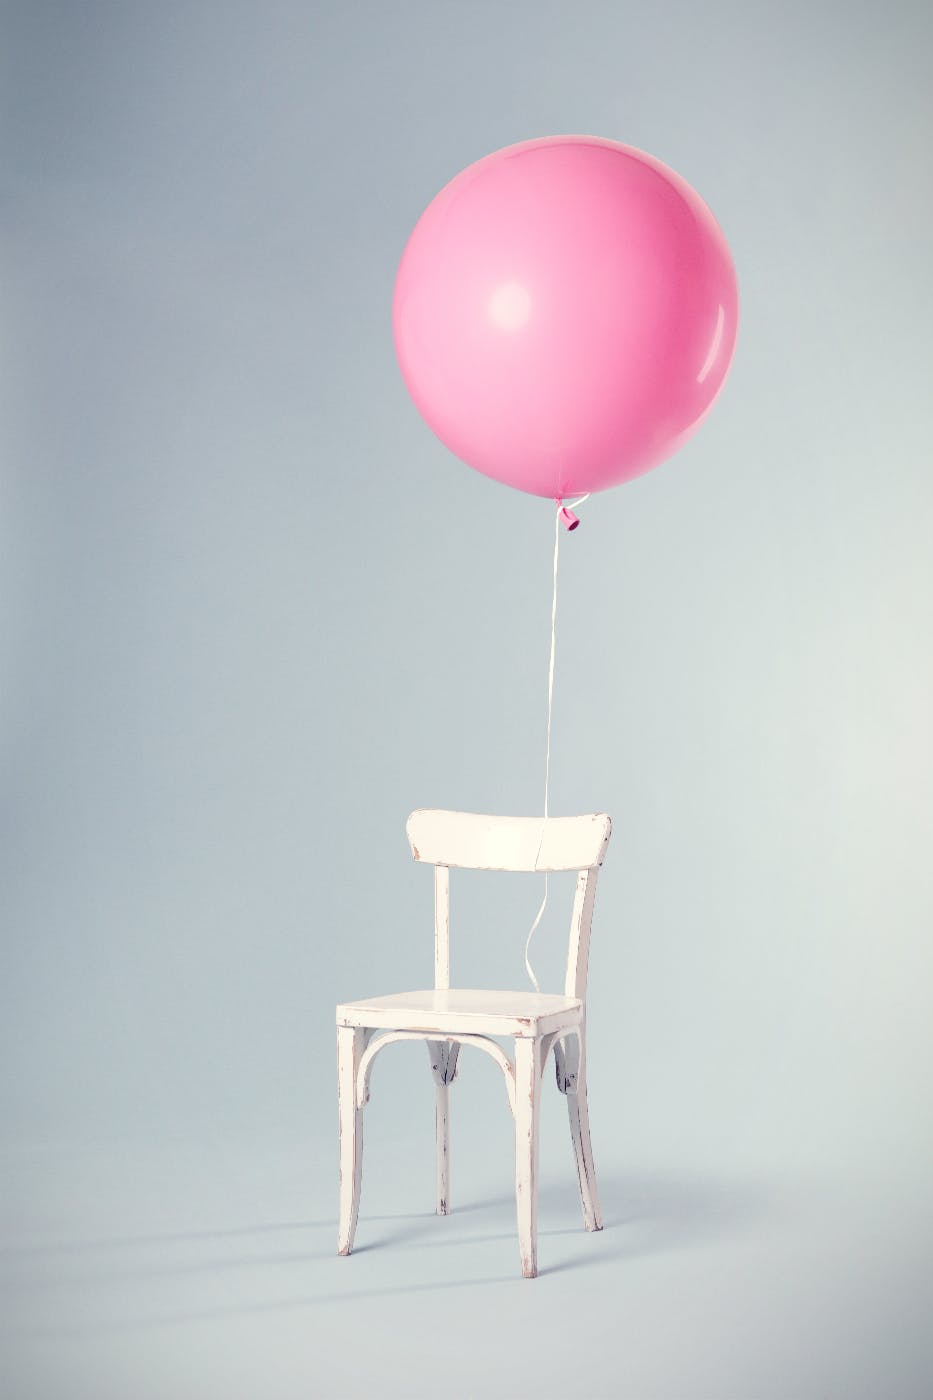 A pink baloon tied to a white chair